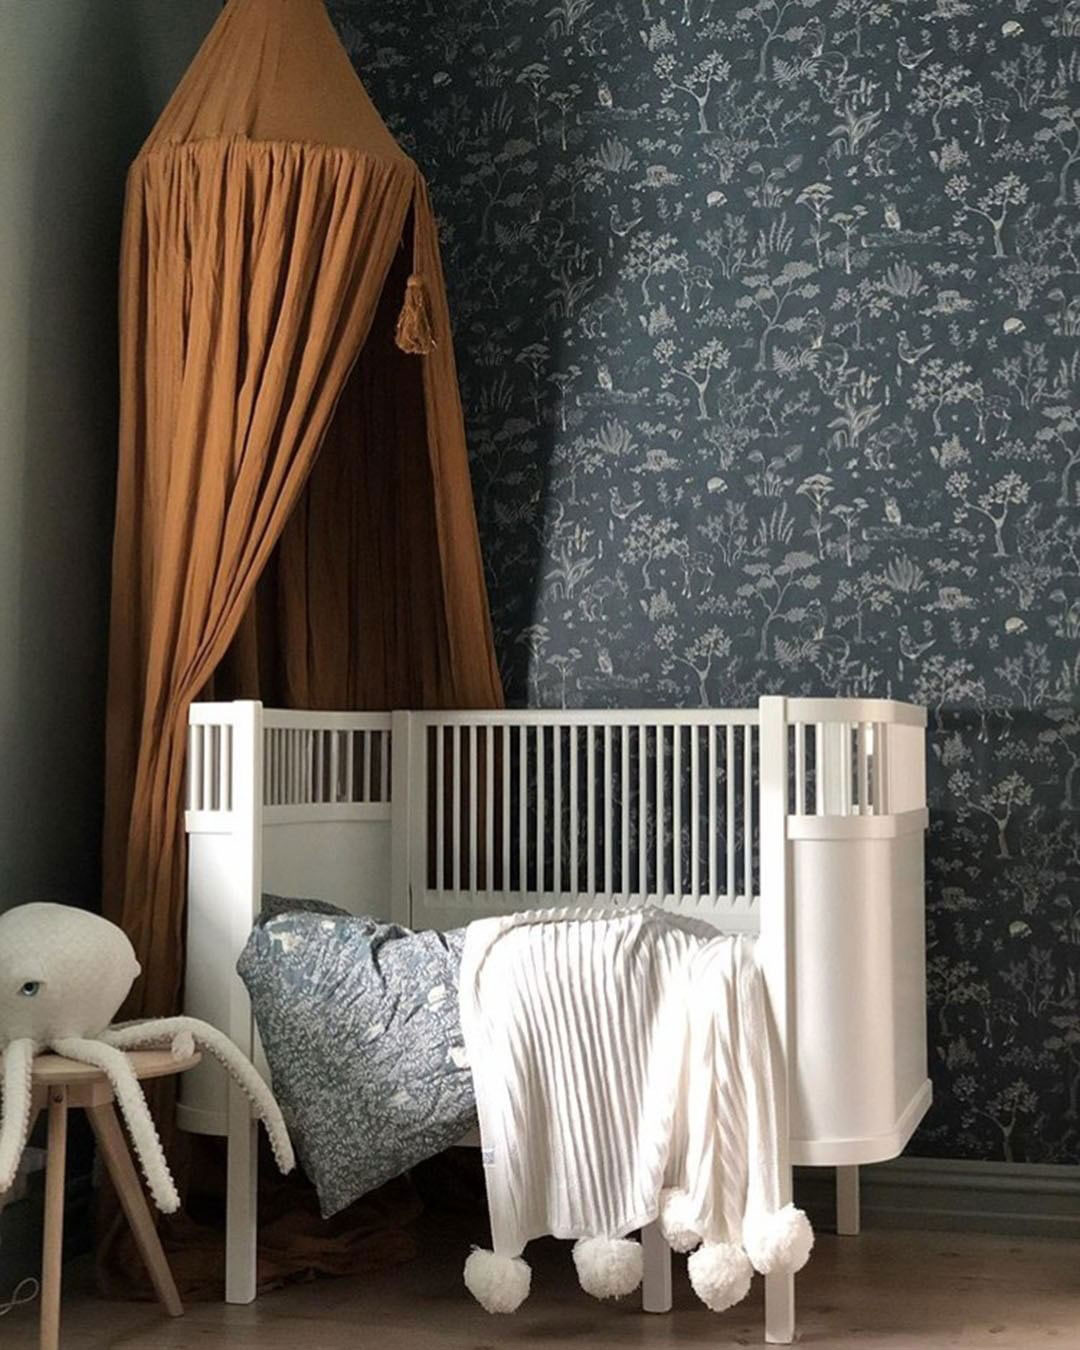 dark botanical print wallpaper is another cool idea to rock dark shades in the nursery